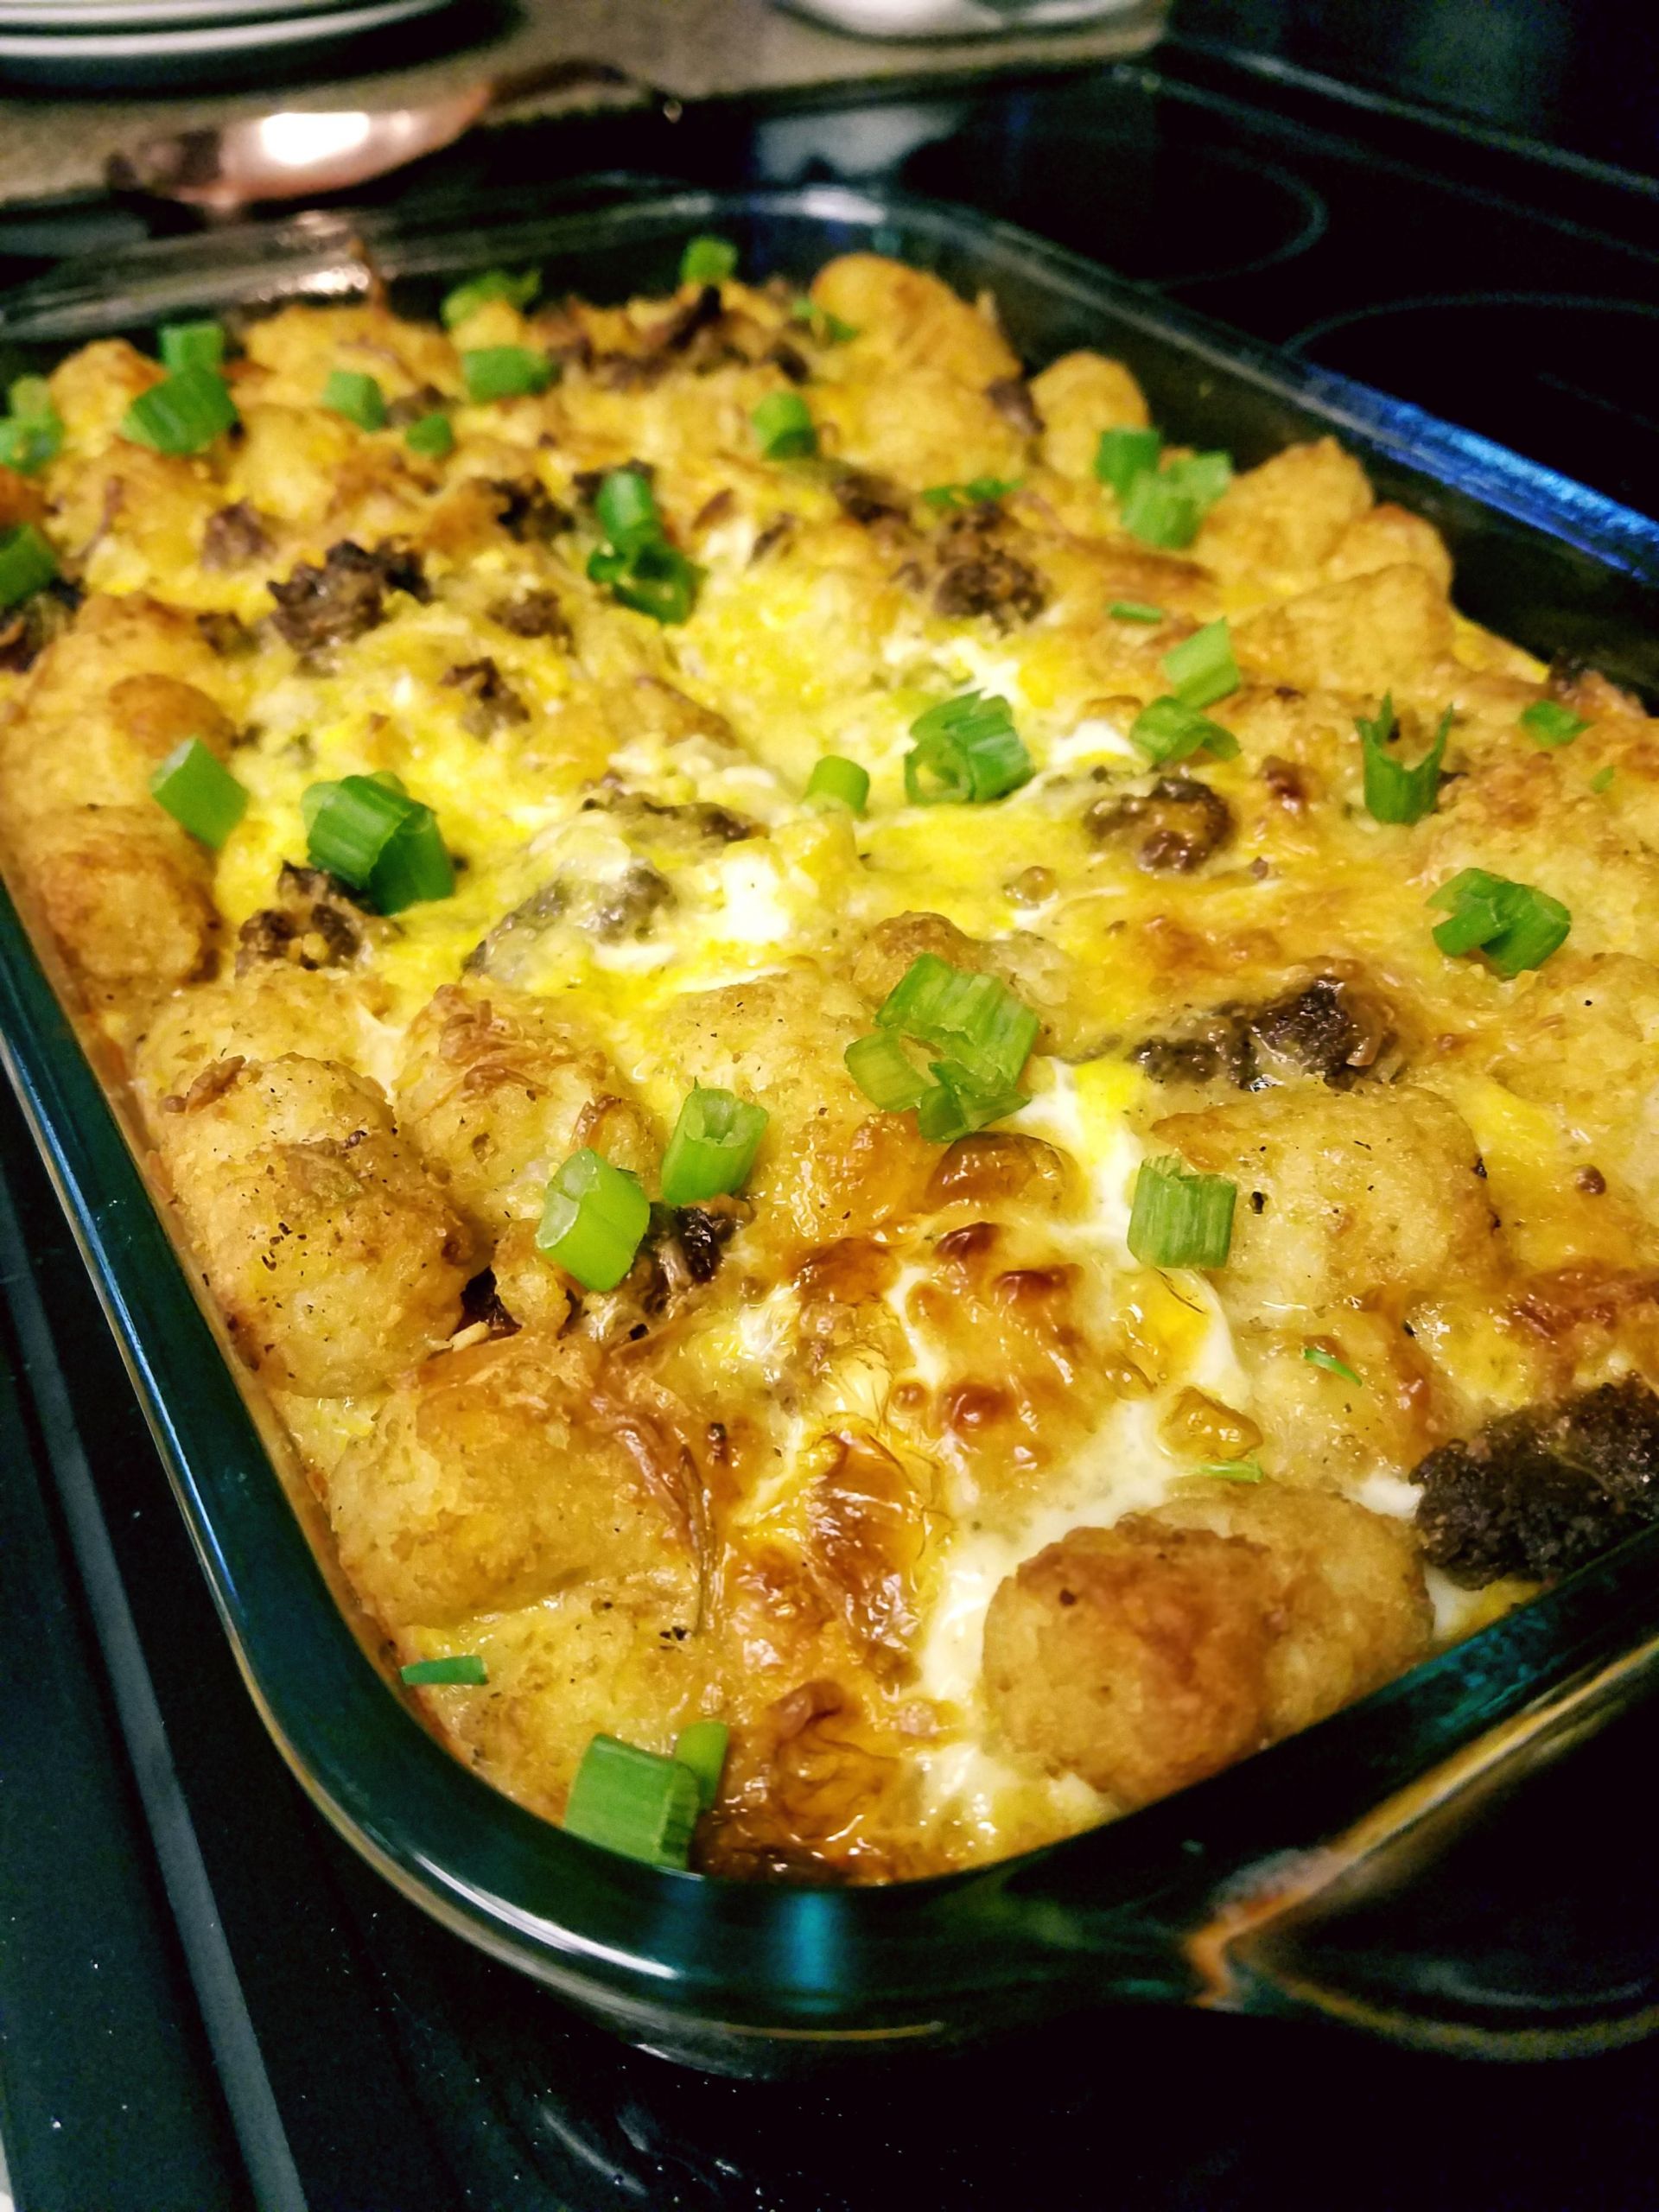 Breakfast Casserole With Tater Tots And Bacon
 [Homemade] Breakfast casserole with tater tot hot sausage